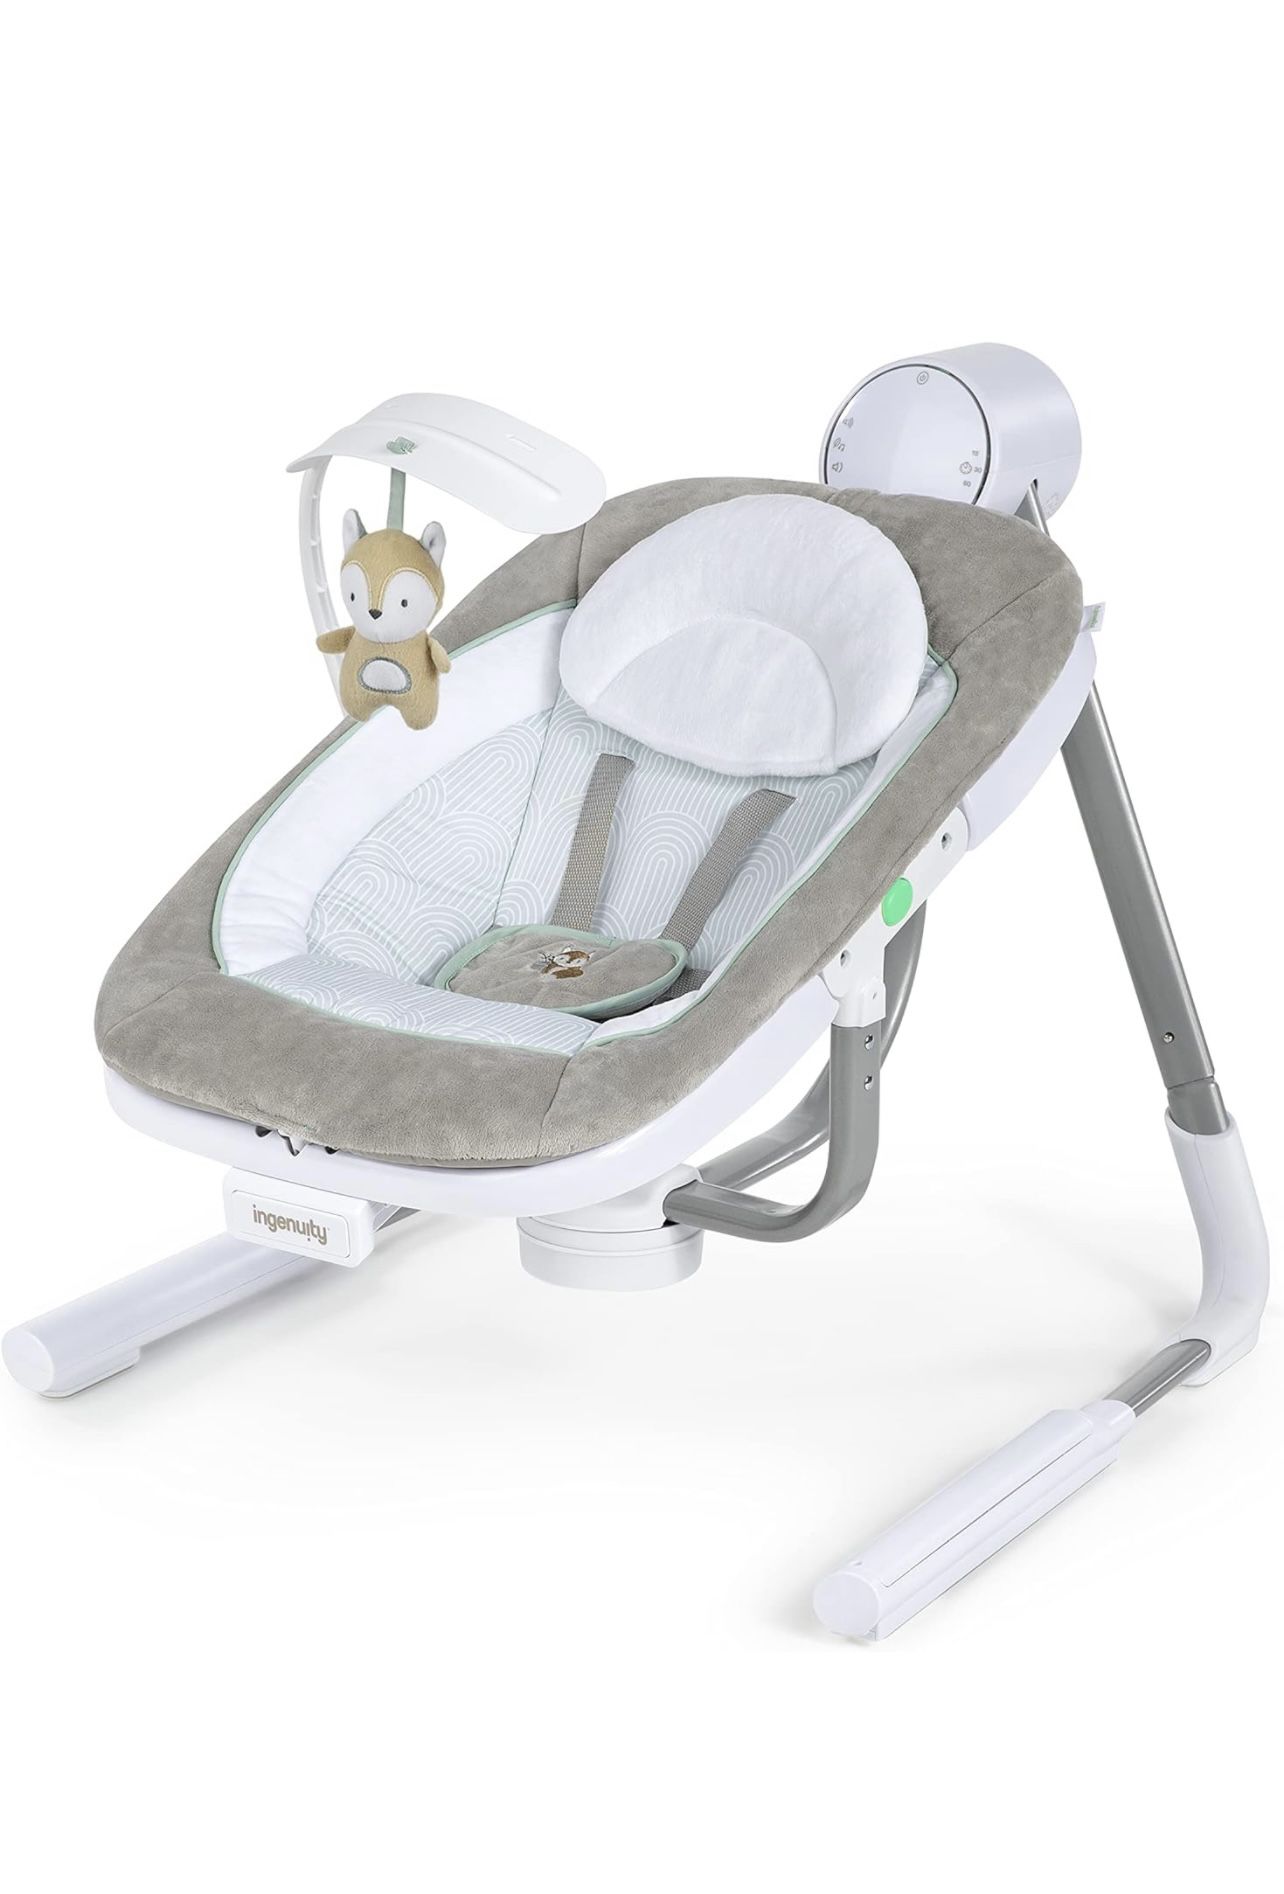 Ingenuity Anyway Sway 5-Speed Multi-Direction Portable Foldable Baby Swing & Infant Seat with Vibrations, Nature Sounds, 0-9 Months 6-20 lbs (Ray)